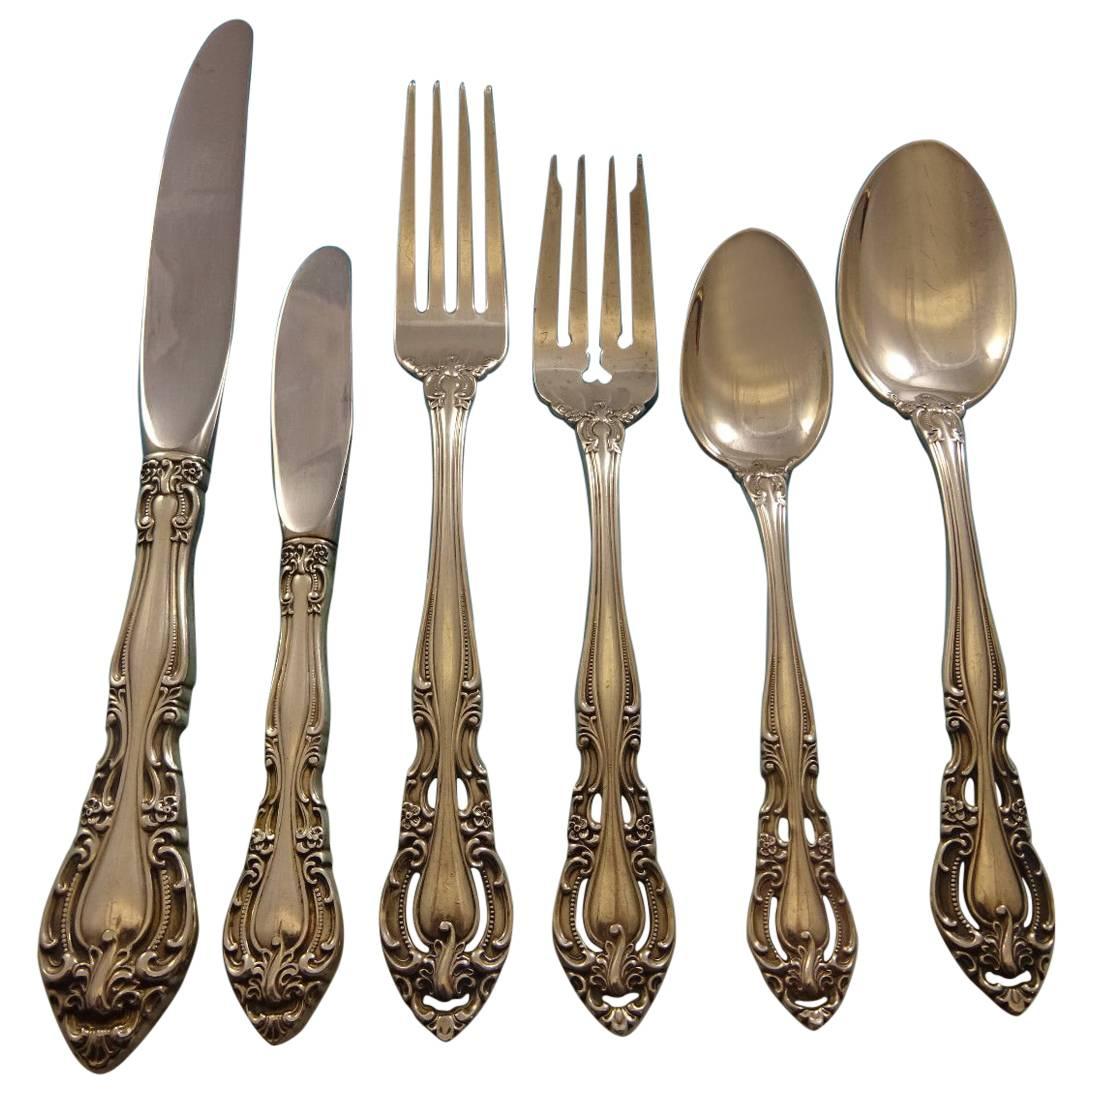 Baronial by Gorham Sterling Silver Flatware Set 8 Service Place Size 53 Pcs